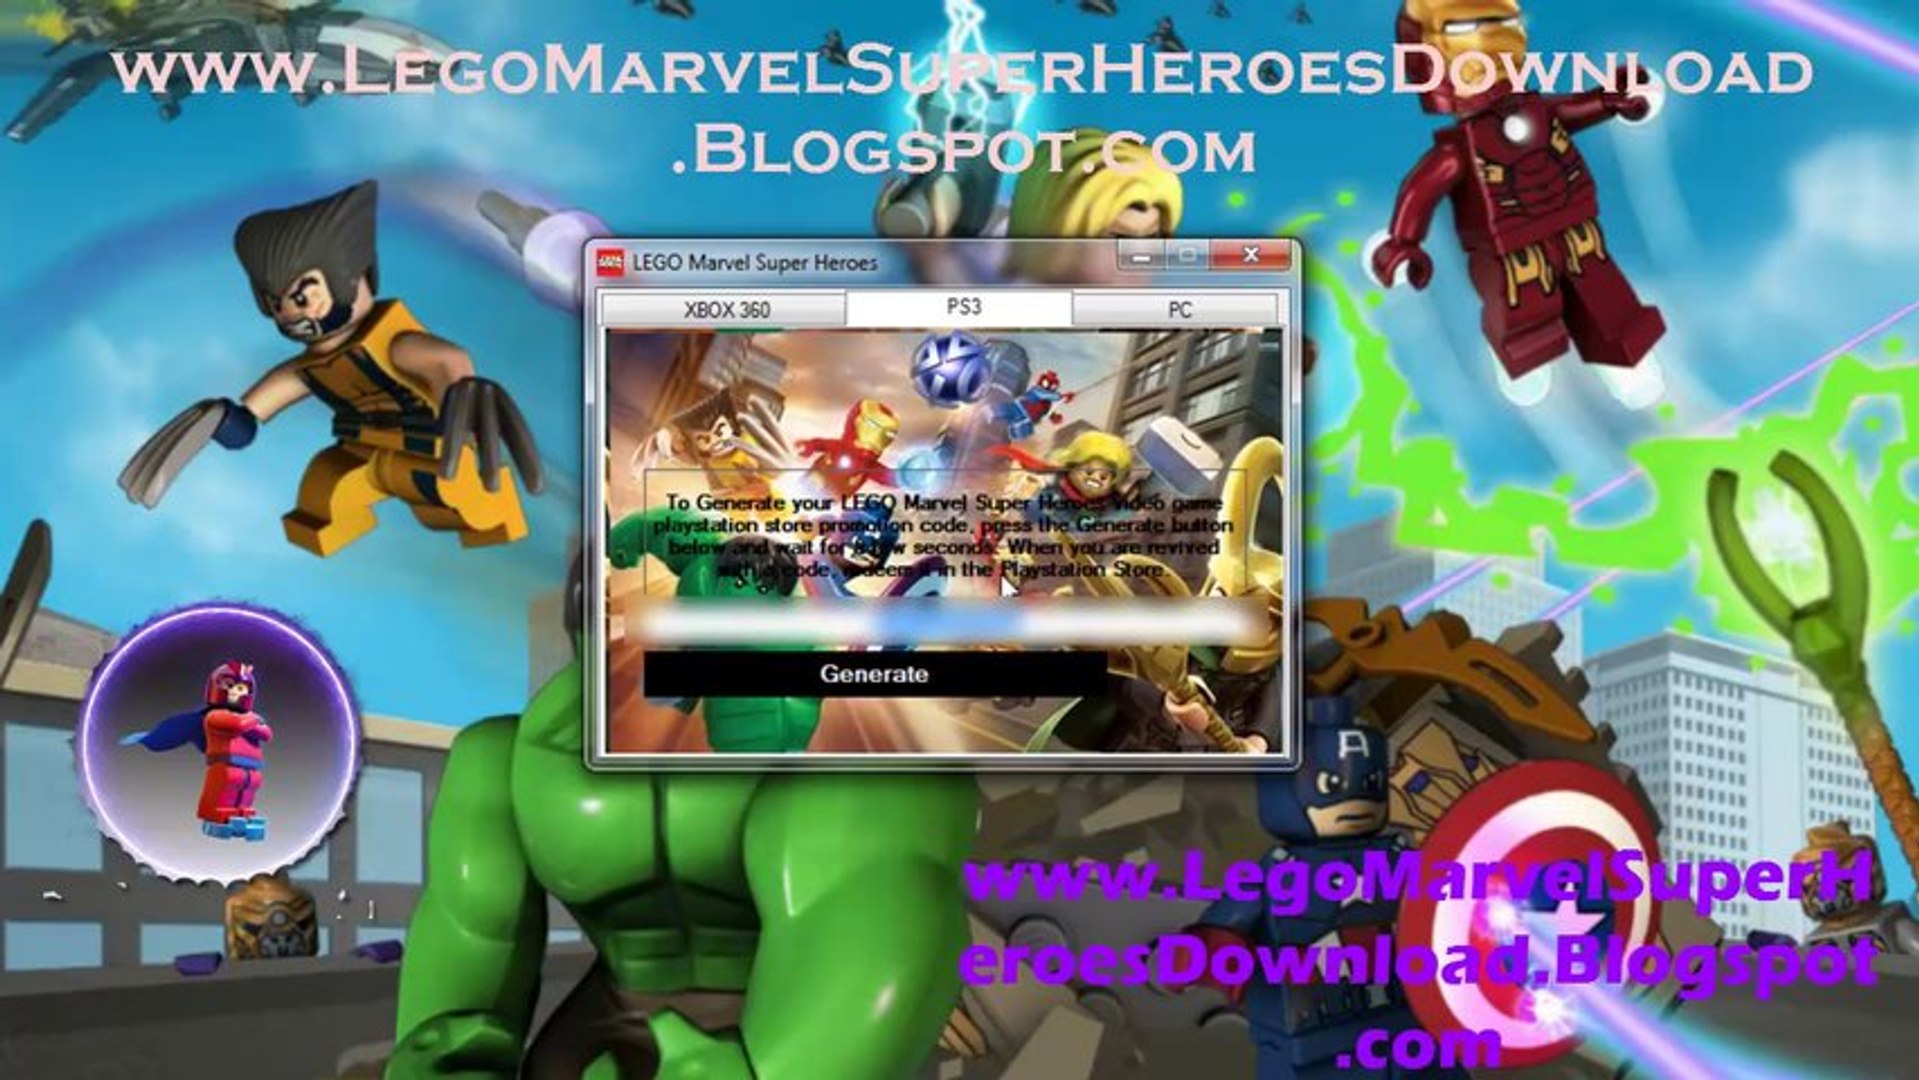 How To Download Lego Marvel Super Heroes Game Crack Free Xbox 360 Ps3 Pc